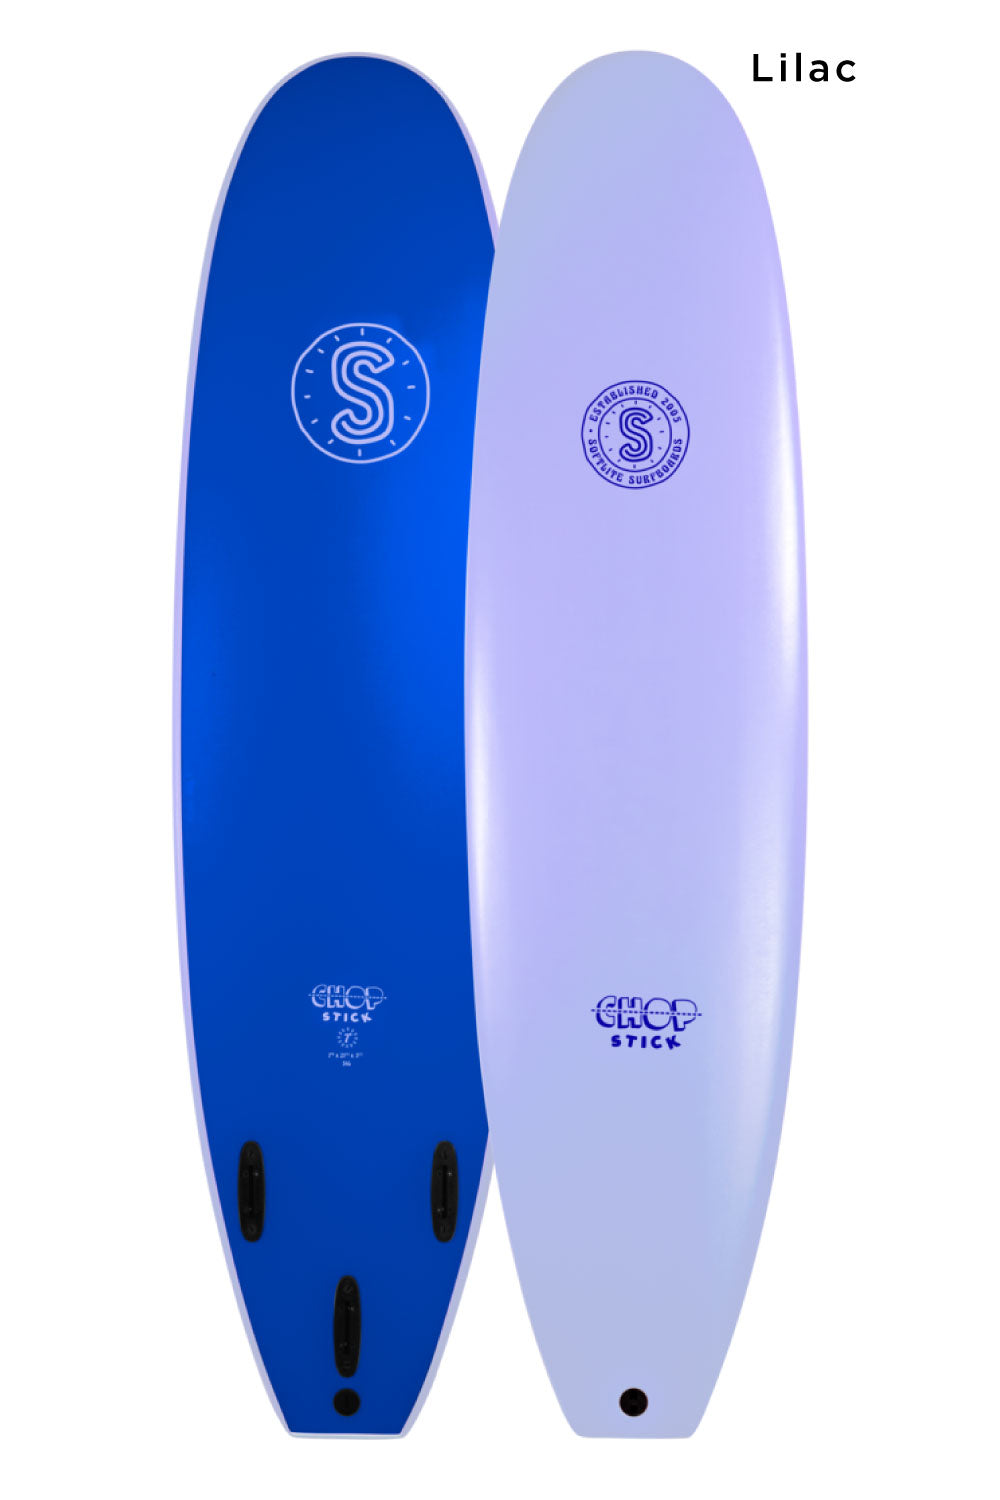 6'0 Softlite Chop Stick Softboard - Comes with fins